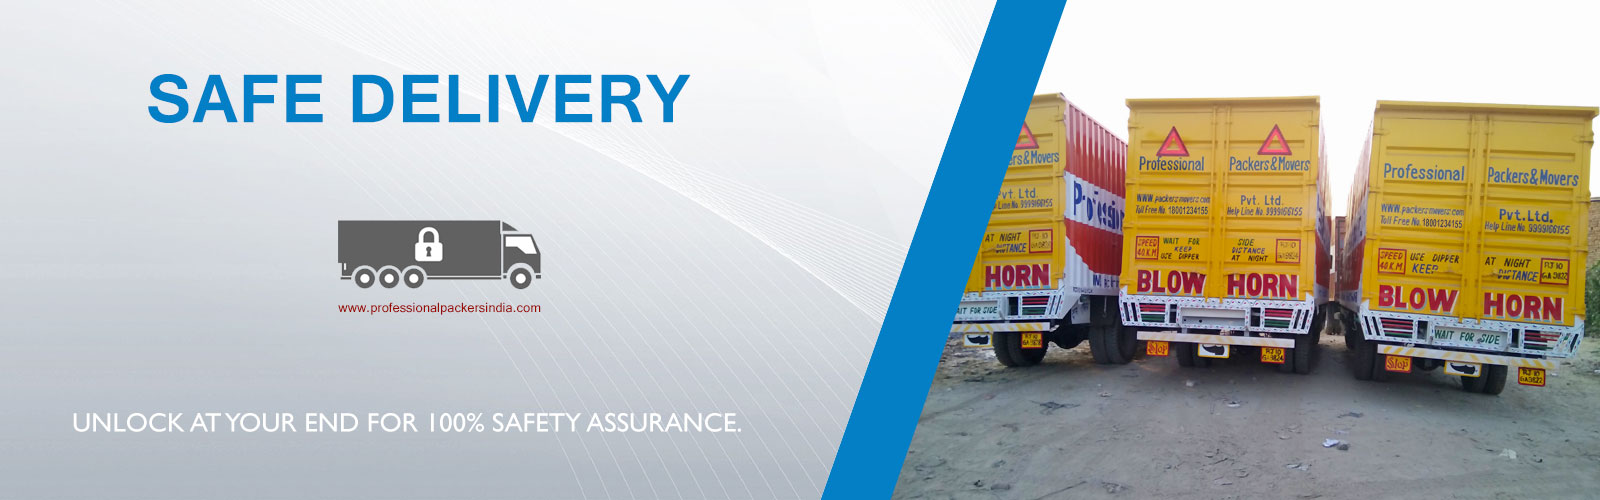 Safety, speed, on time delivery and market best prices are always assured from Professional Packers Movers Whitefield, Bangalore, Moving services in Whitefield, Bangalore.